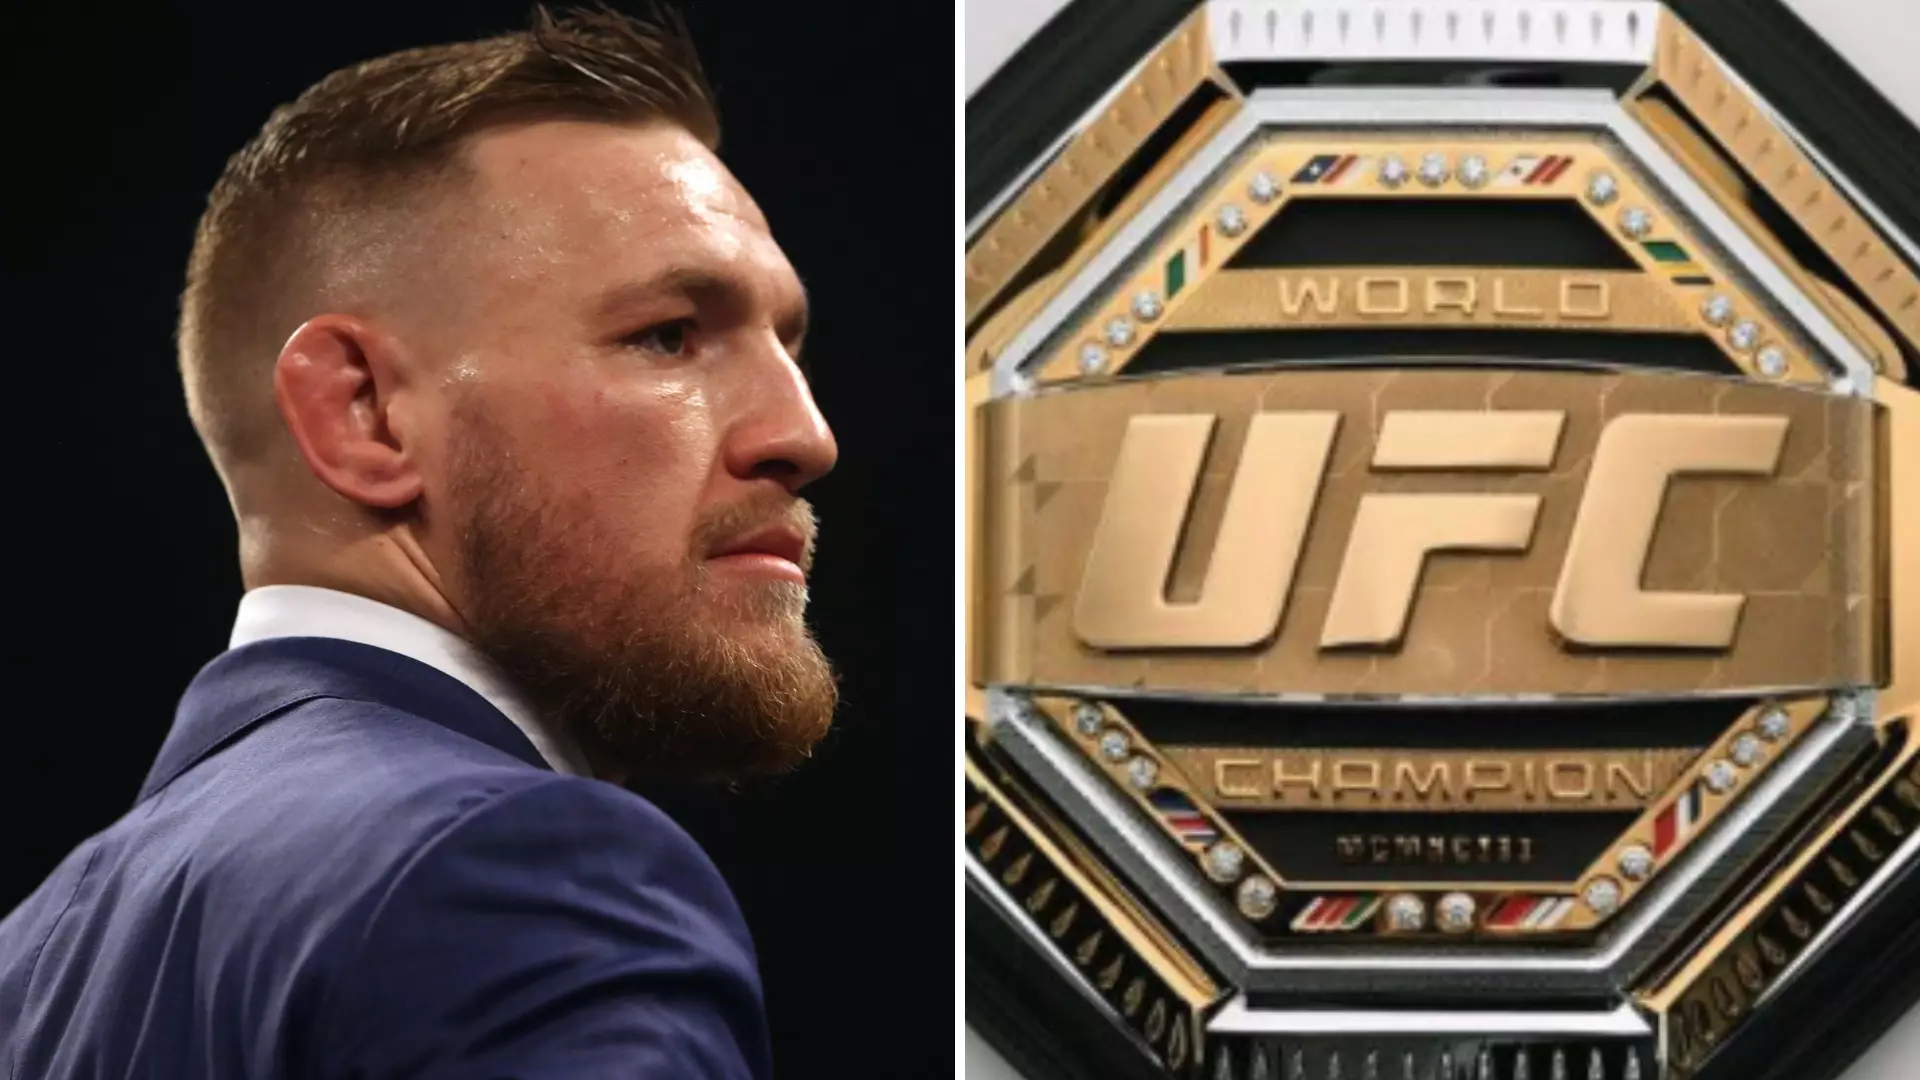 Conor McGregor Responds To UFC After Introduction Of The Legacy Belt 